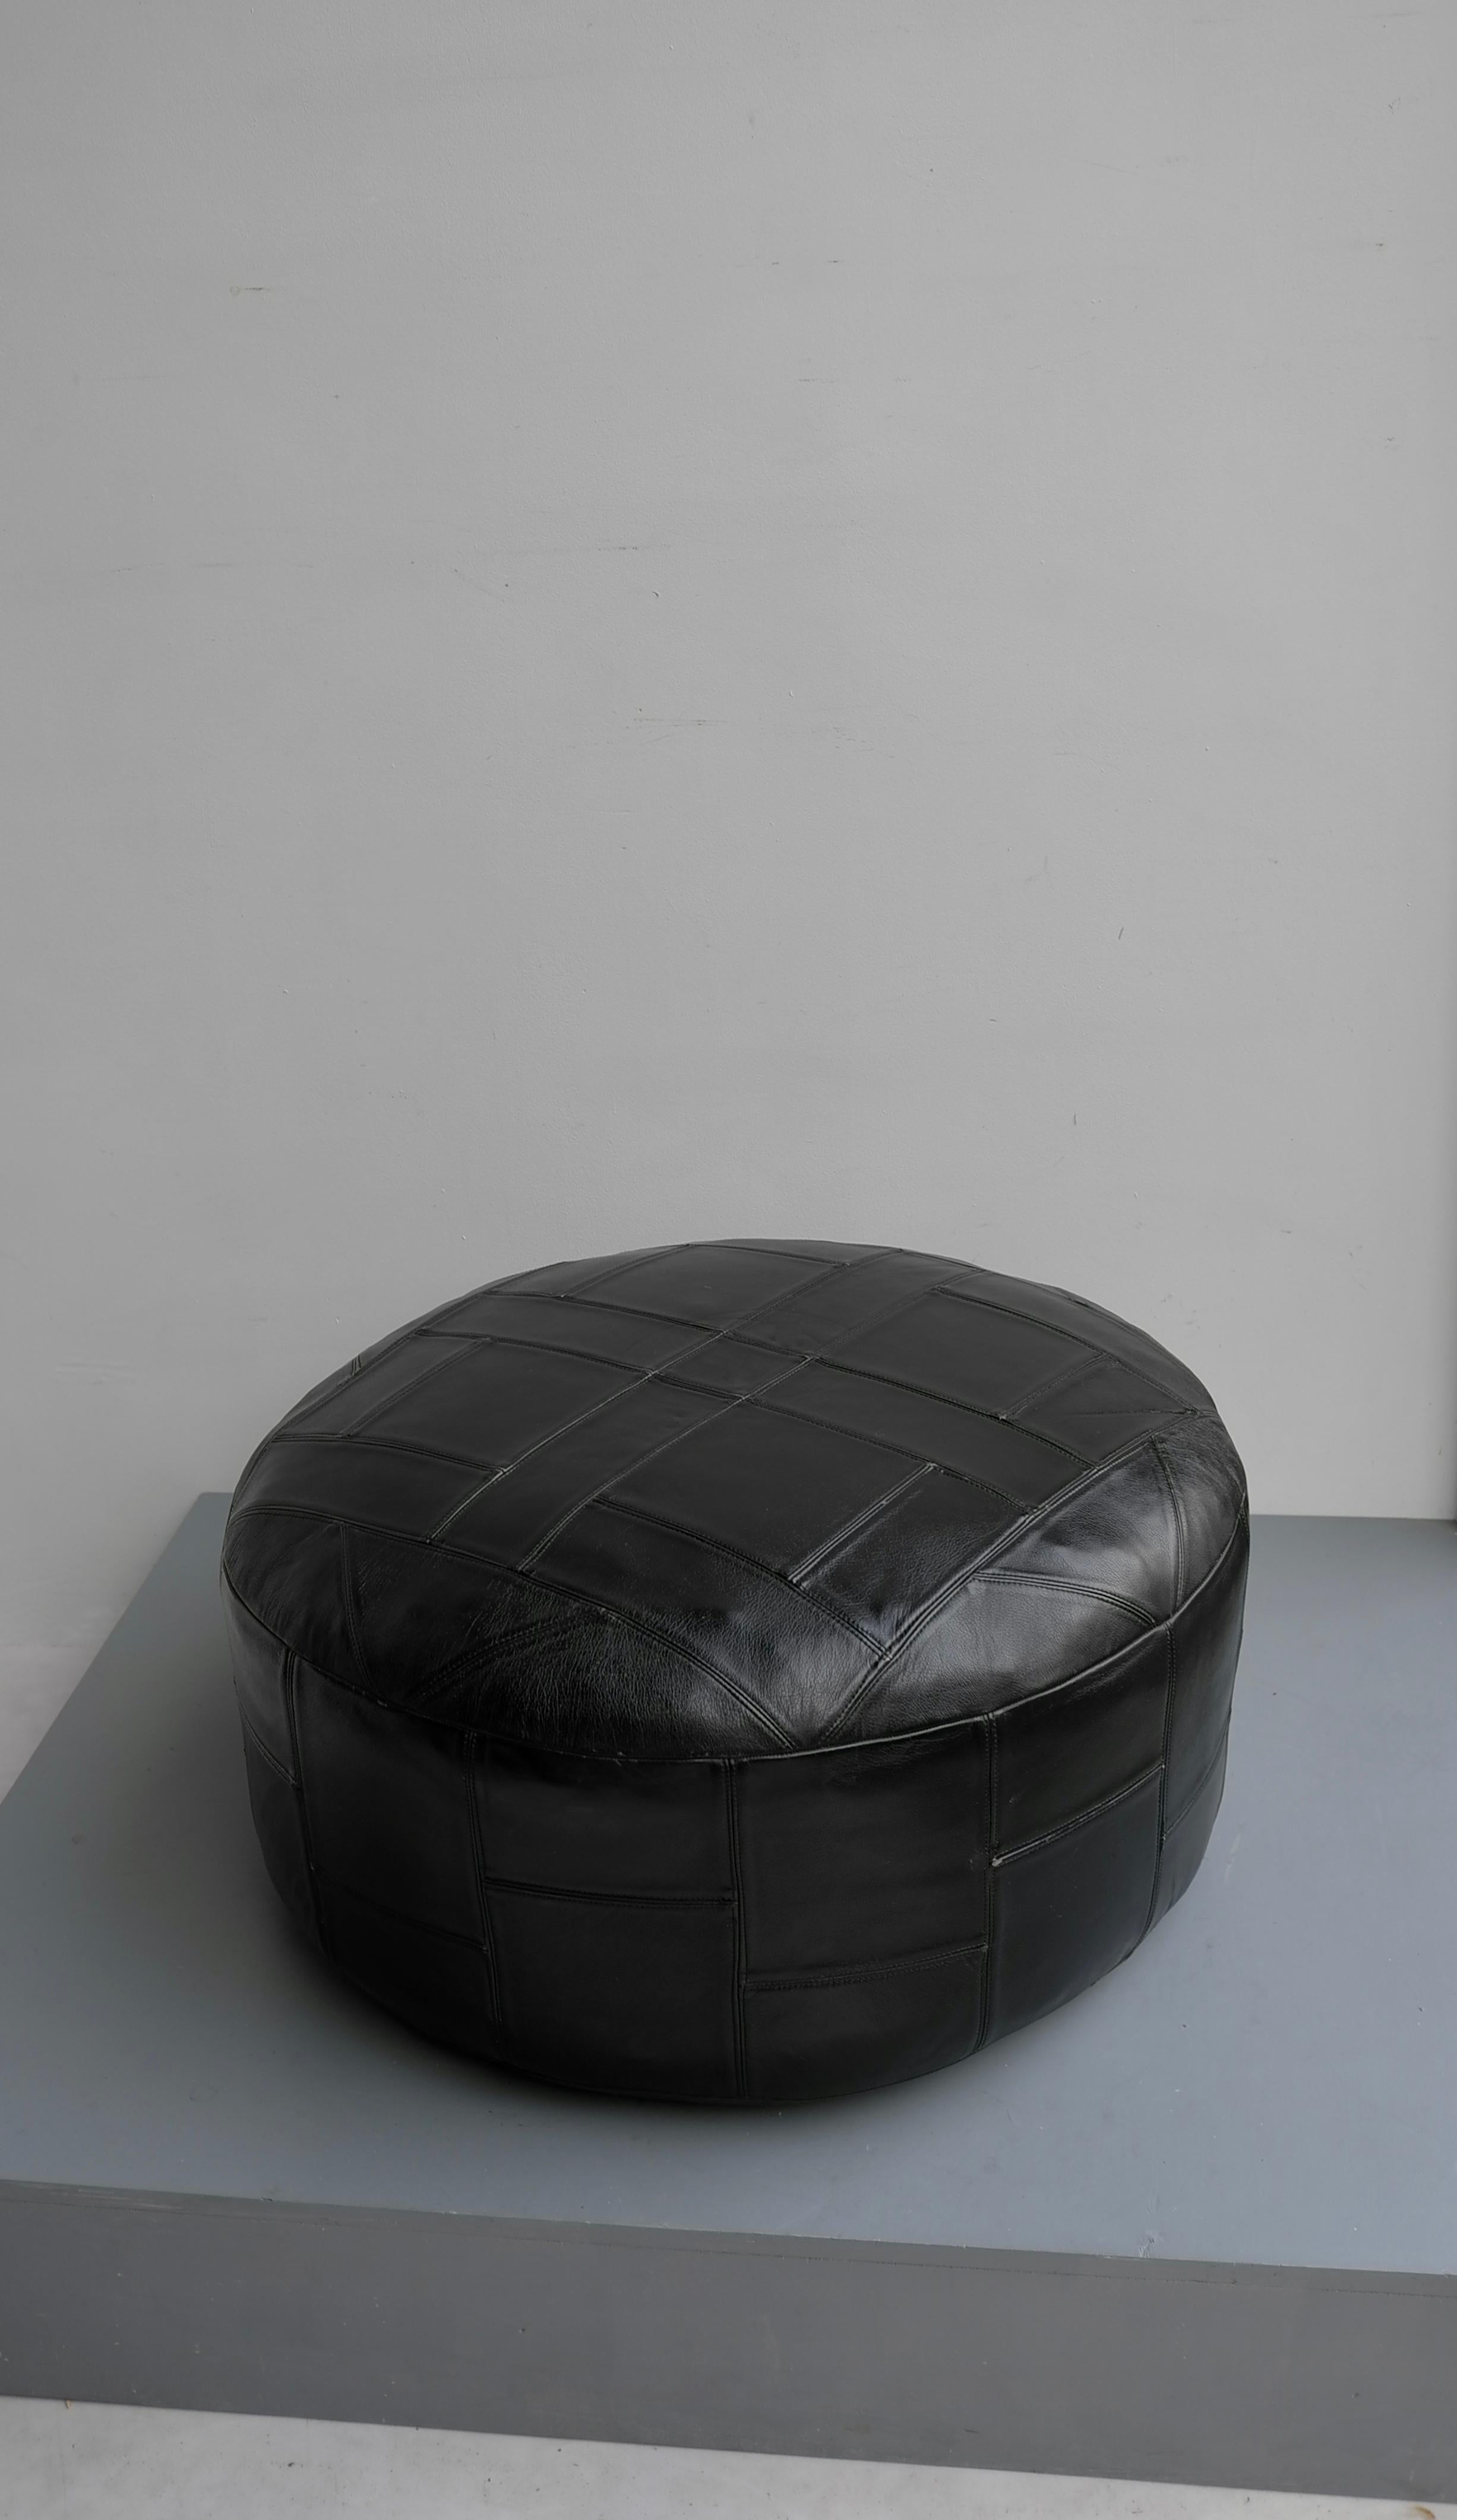 European Large Midcentury Patchwork Pouf in Black Leather